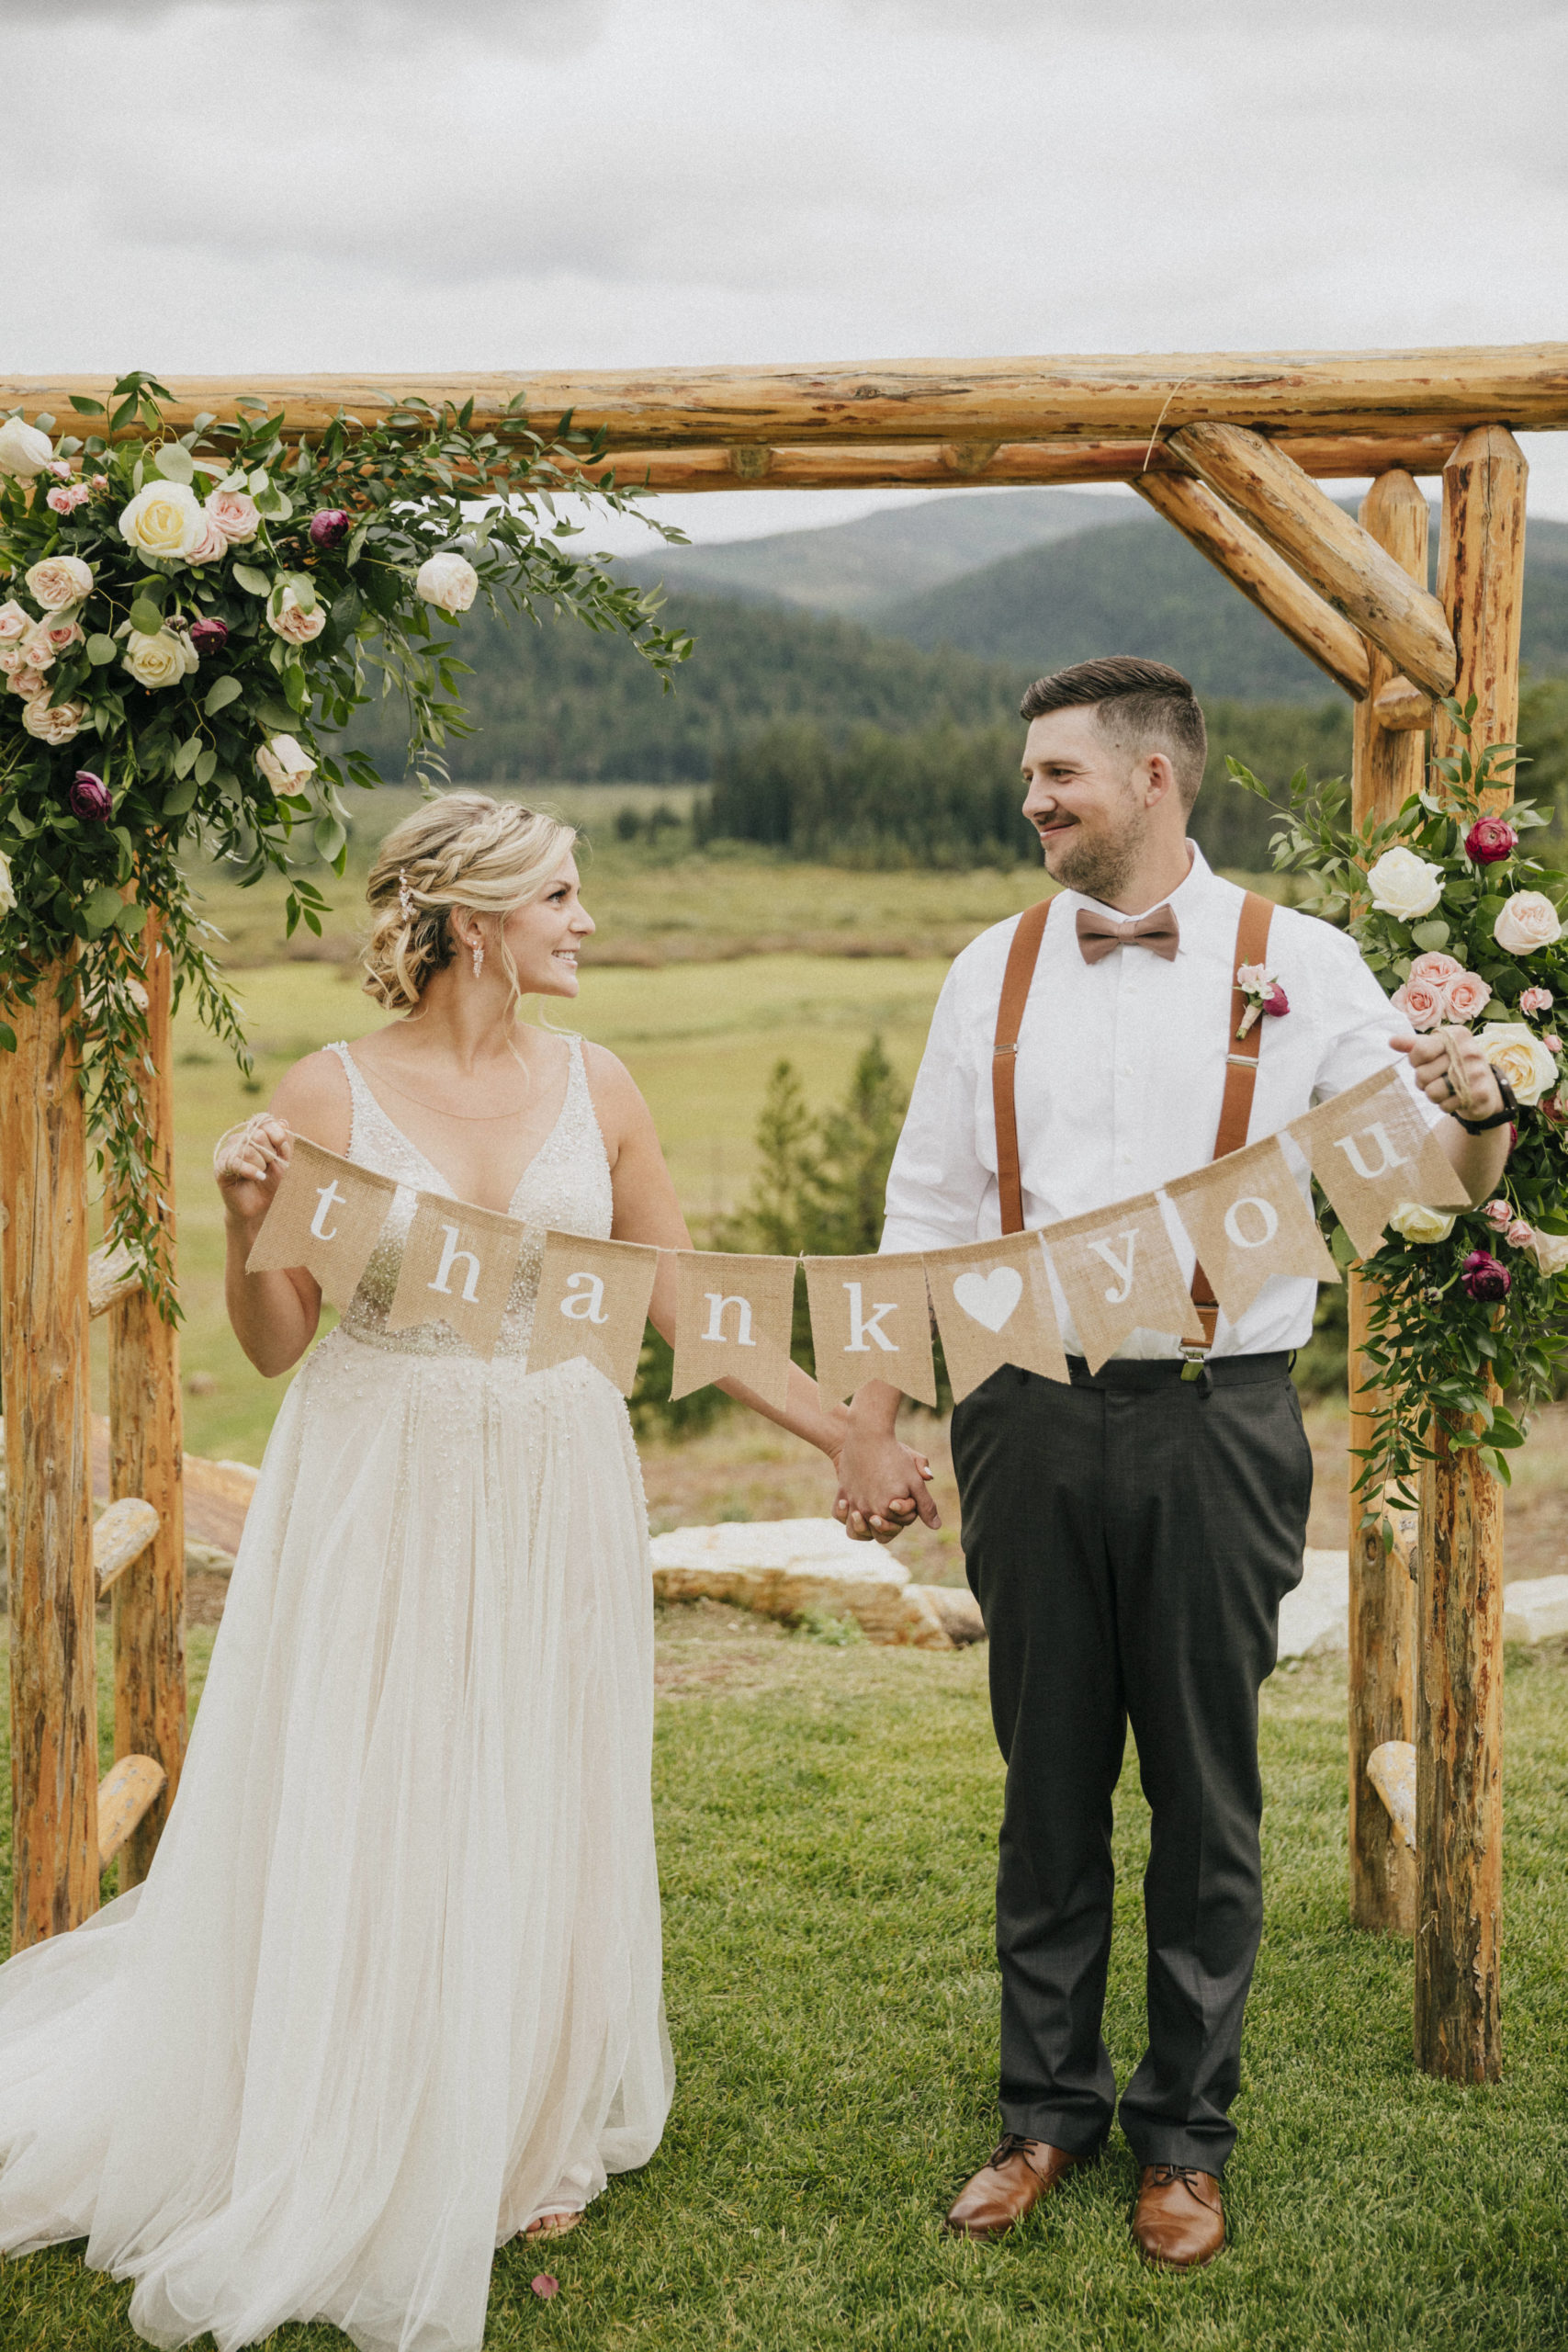 Bride and groom under ceremony arch holding thank you sign at their ranch wedding